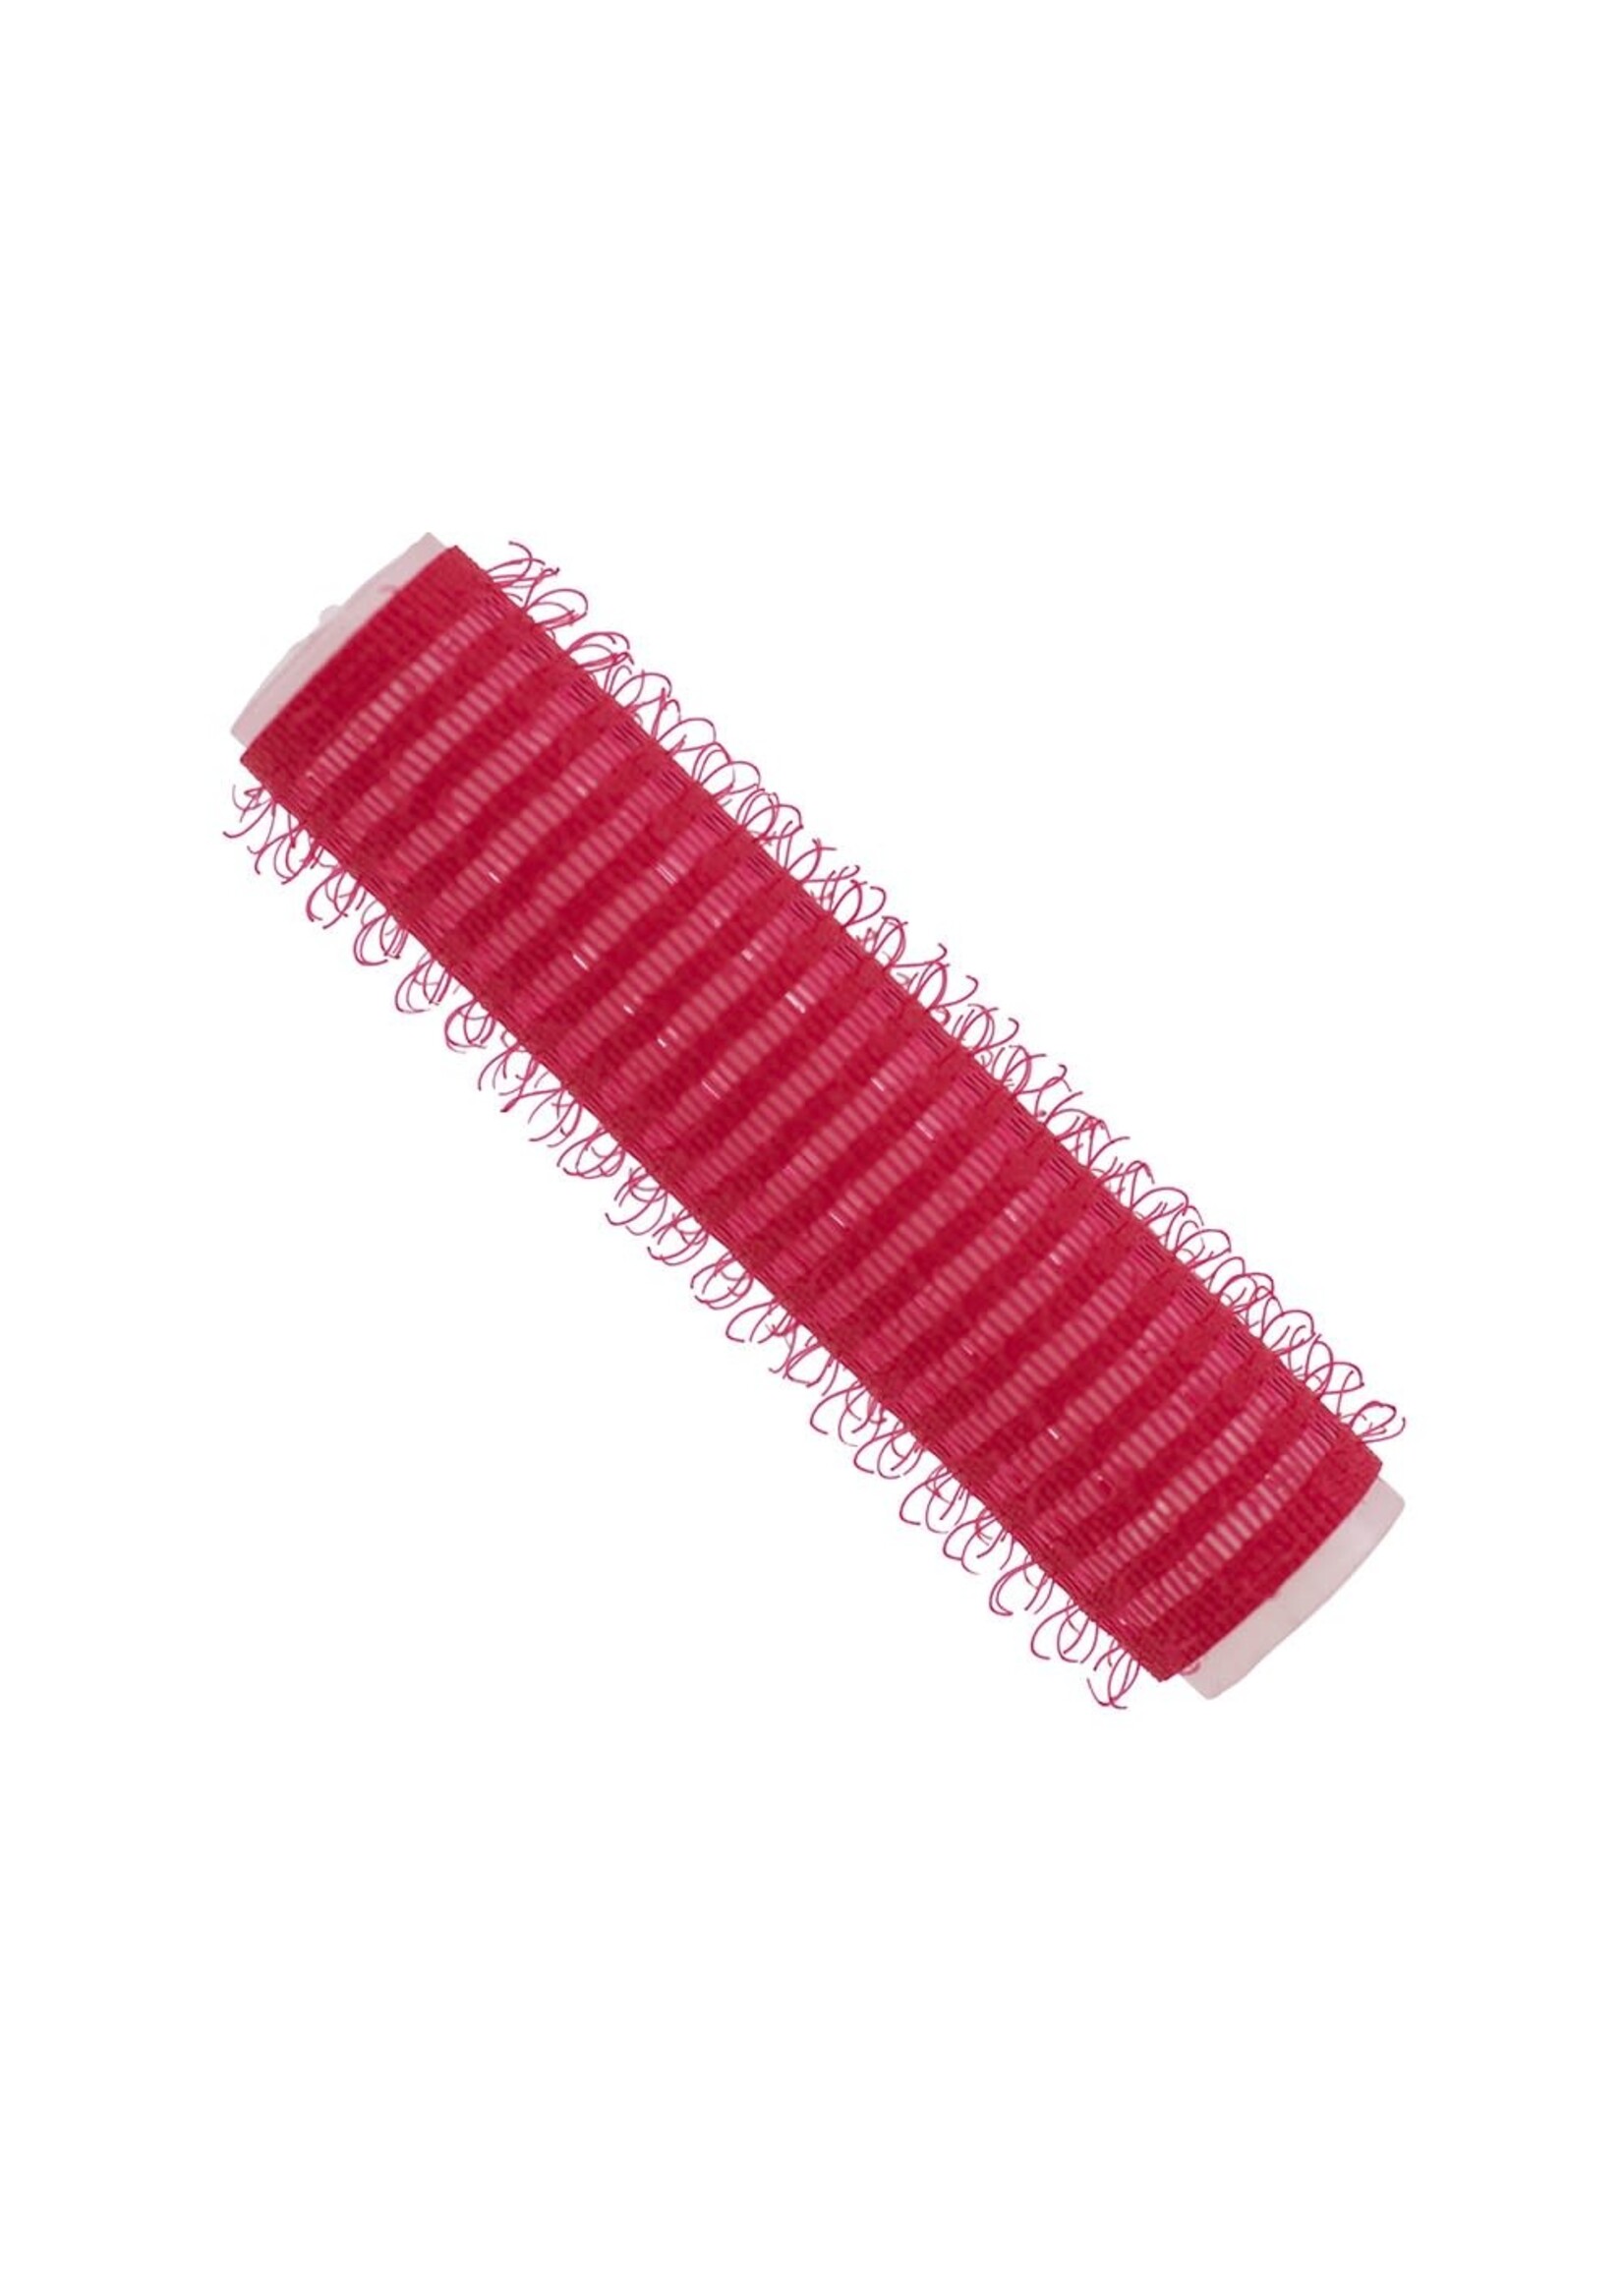 Hair FX Hair FX Self-Gripping Velcro Rollers 13mm Red 6pk